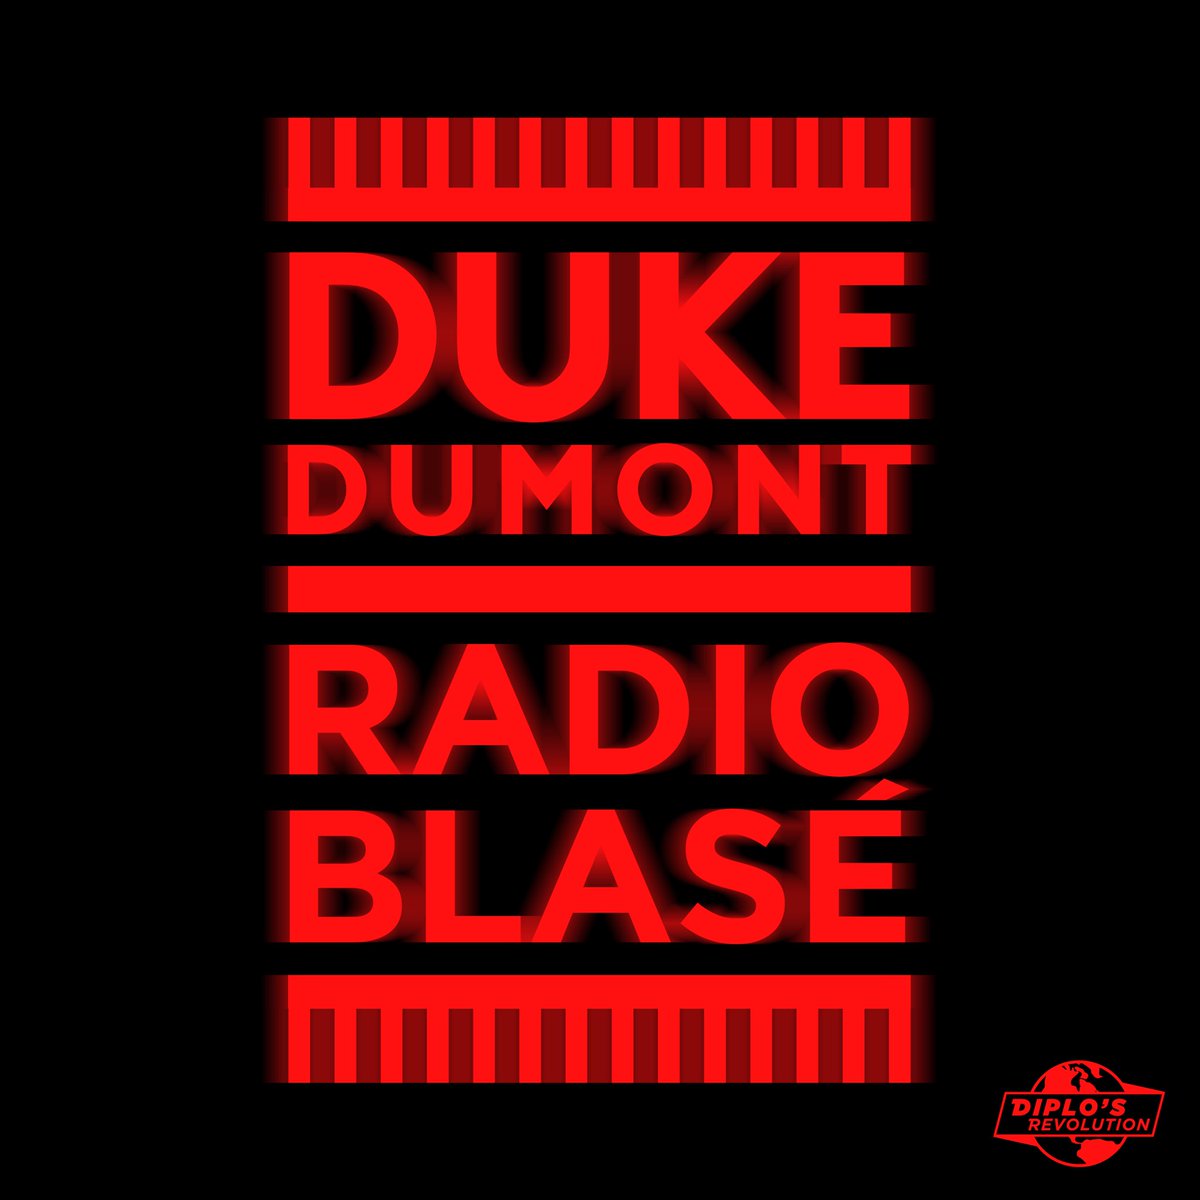 Join @DukeDumont tonight at 7pm ET // 4pm PT for episode 2 of #RadioBlasé with heat from Rex The Dog, Kettama, ANOTR, Mat.Joe, Bruno Furlan, DJ Spen and some Duke Dumont exclusive tracks.